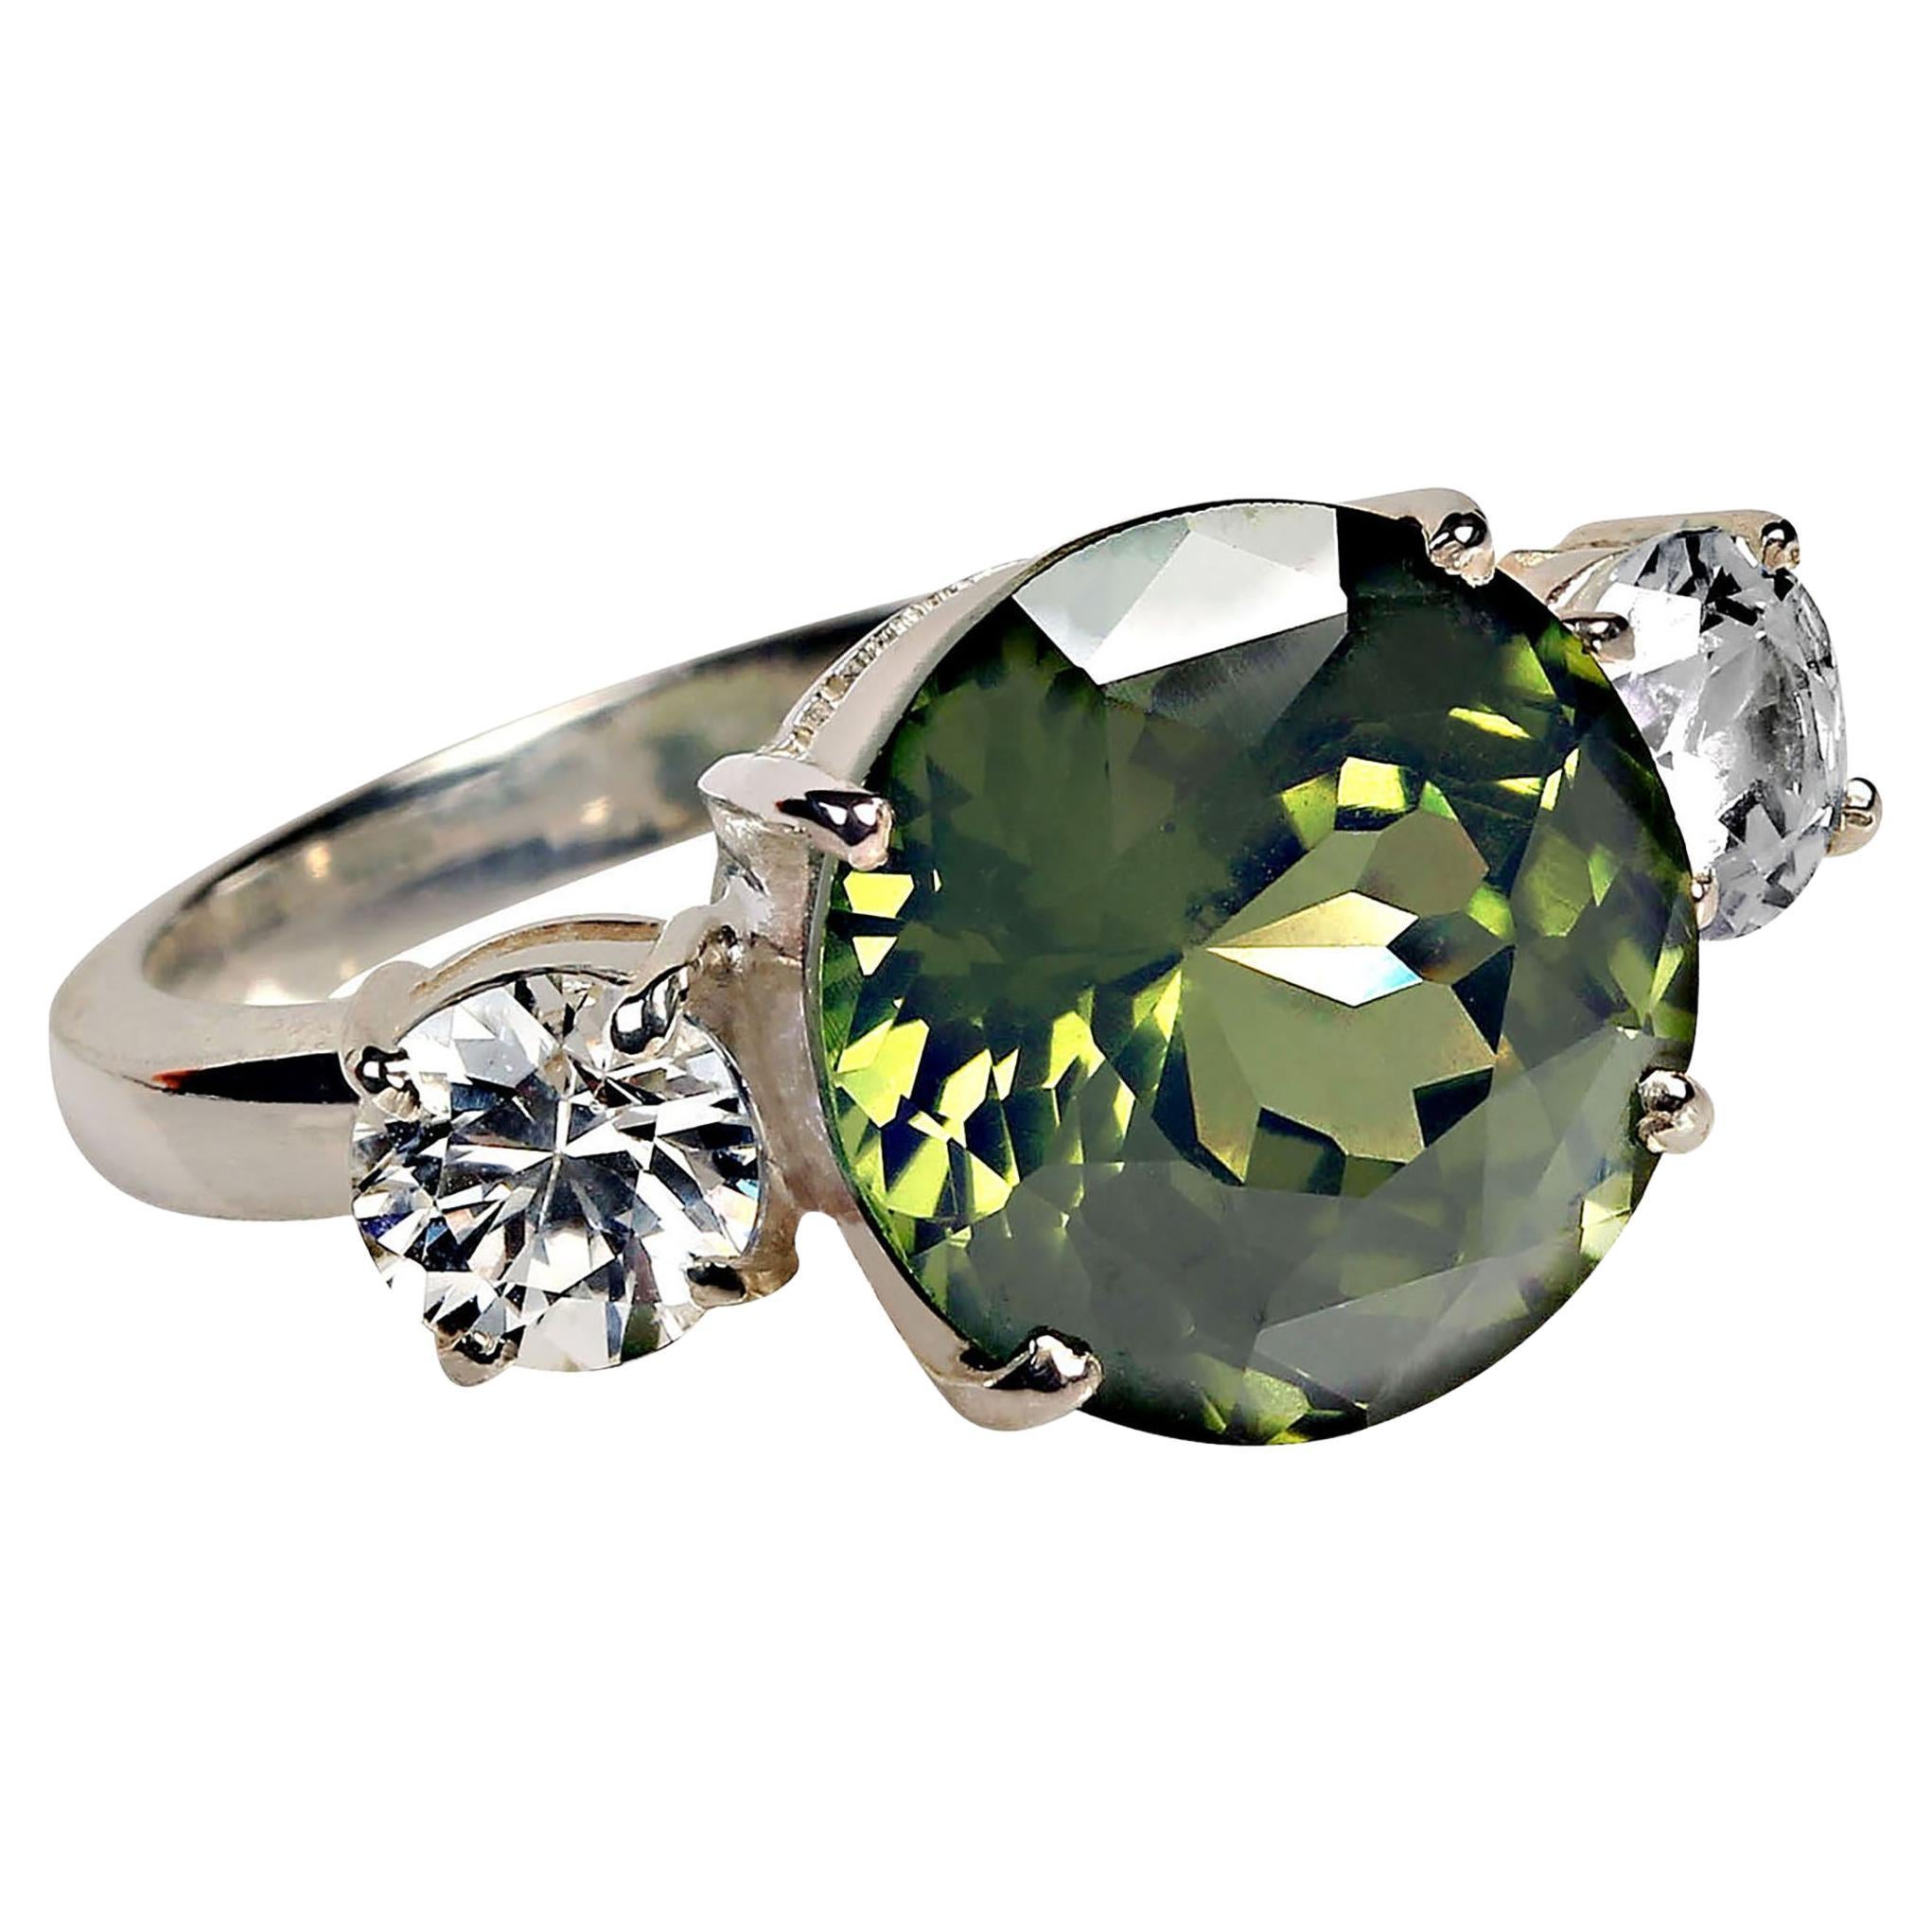 Artisan AJD Sophisticated 'Big Deal' Green and White Zircon Cocktail Ring For Sale